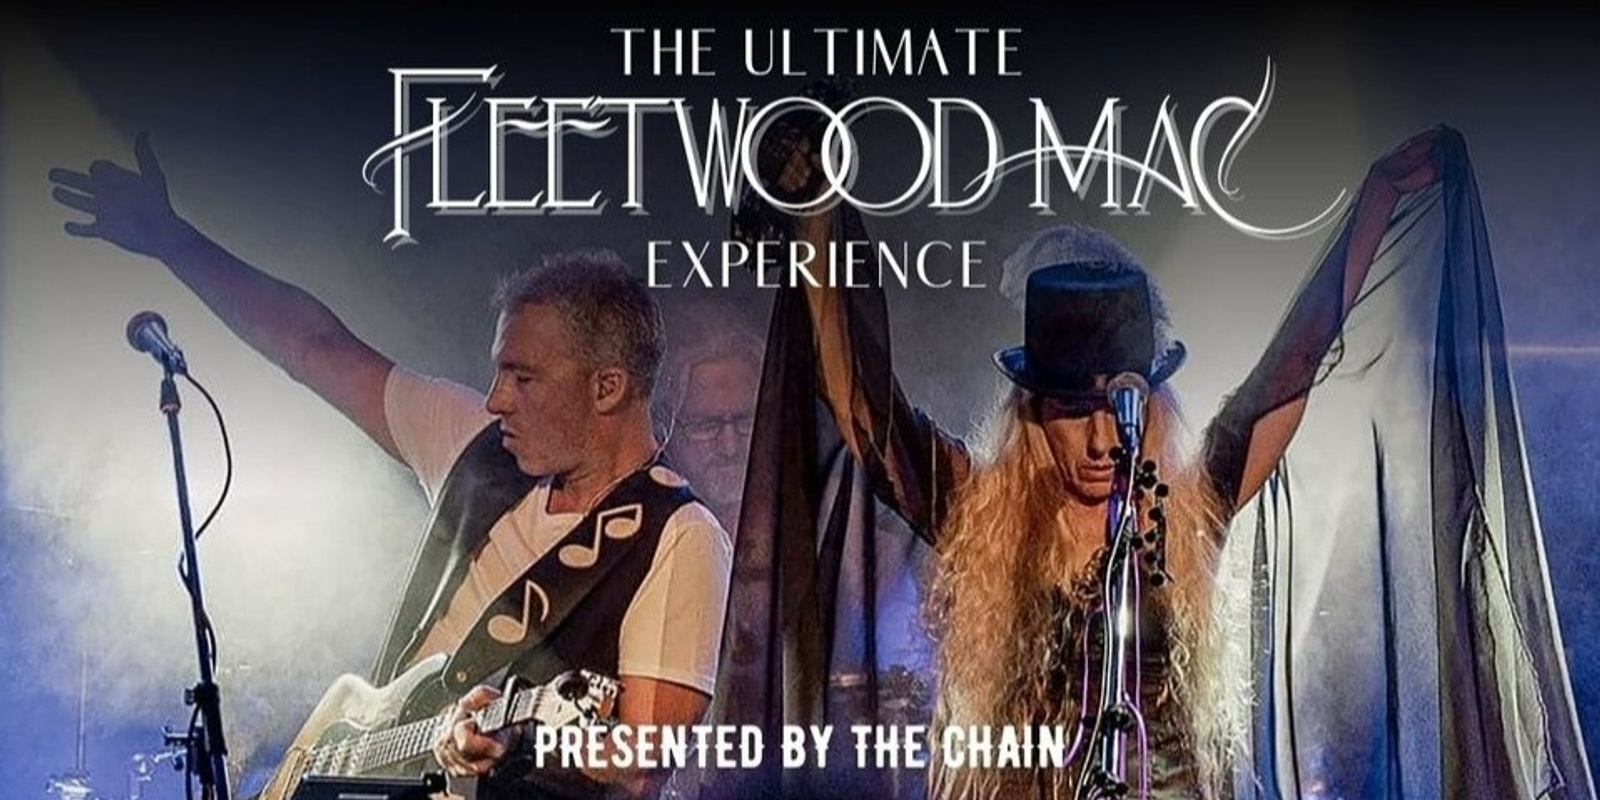 Banner image for The Ultimate Fleetwood Mac Experience